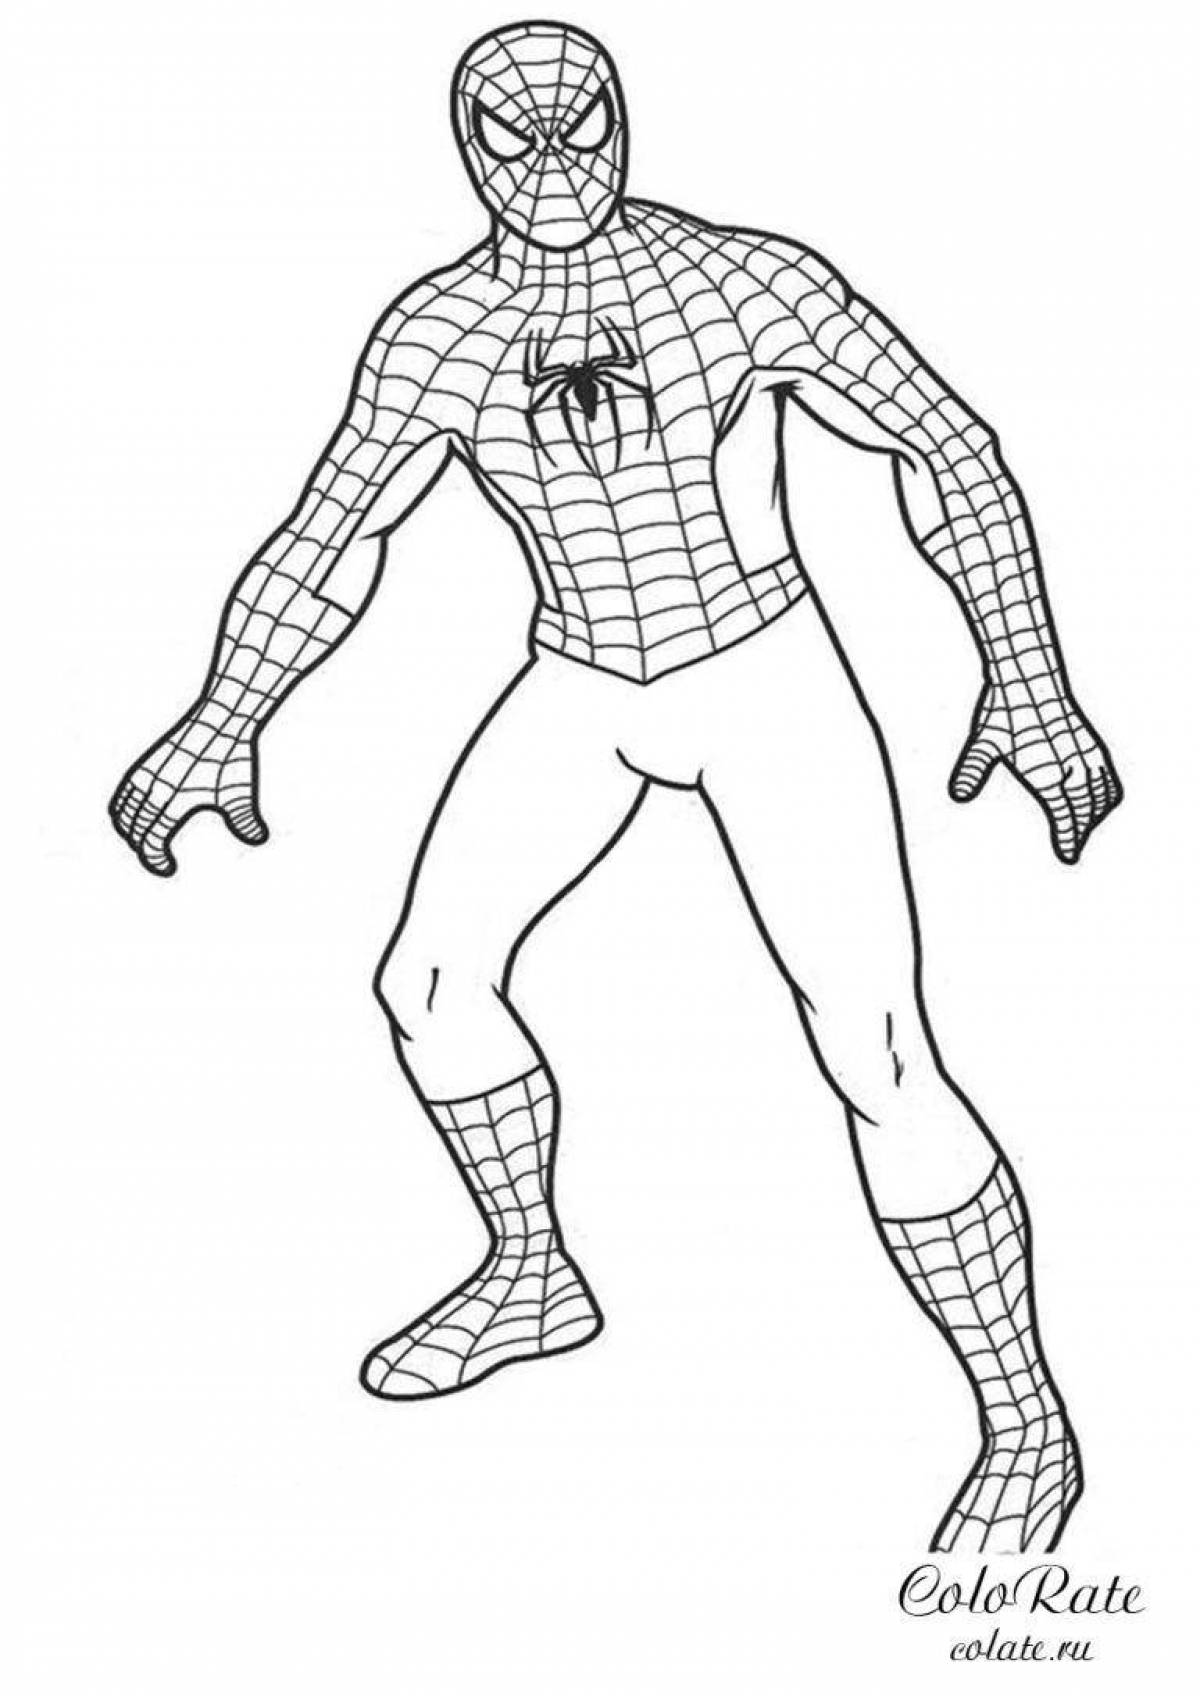 Charming spider-man coloring book